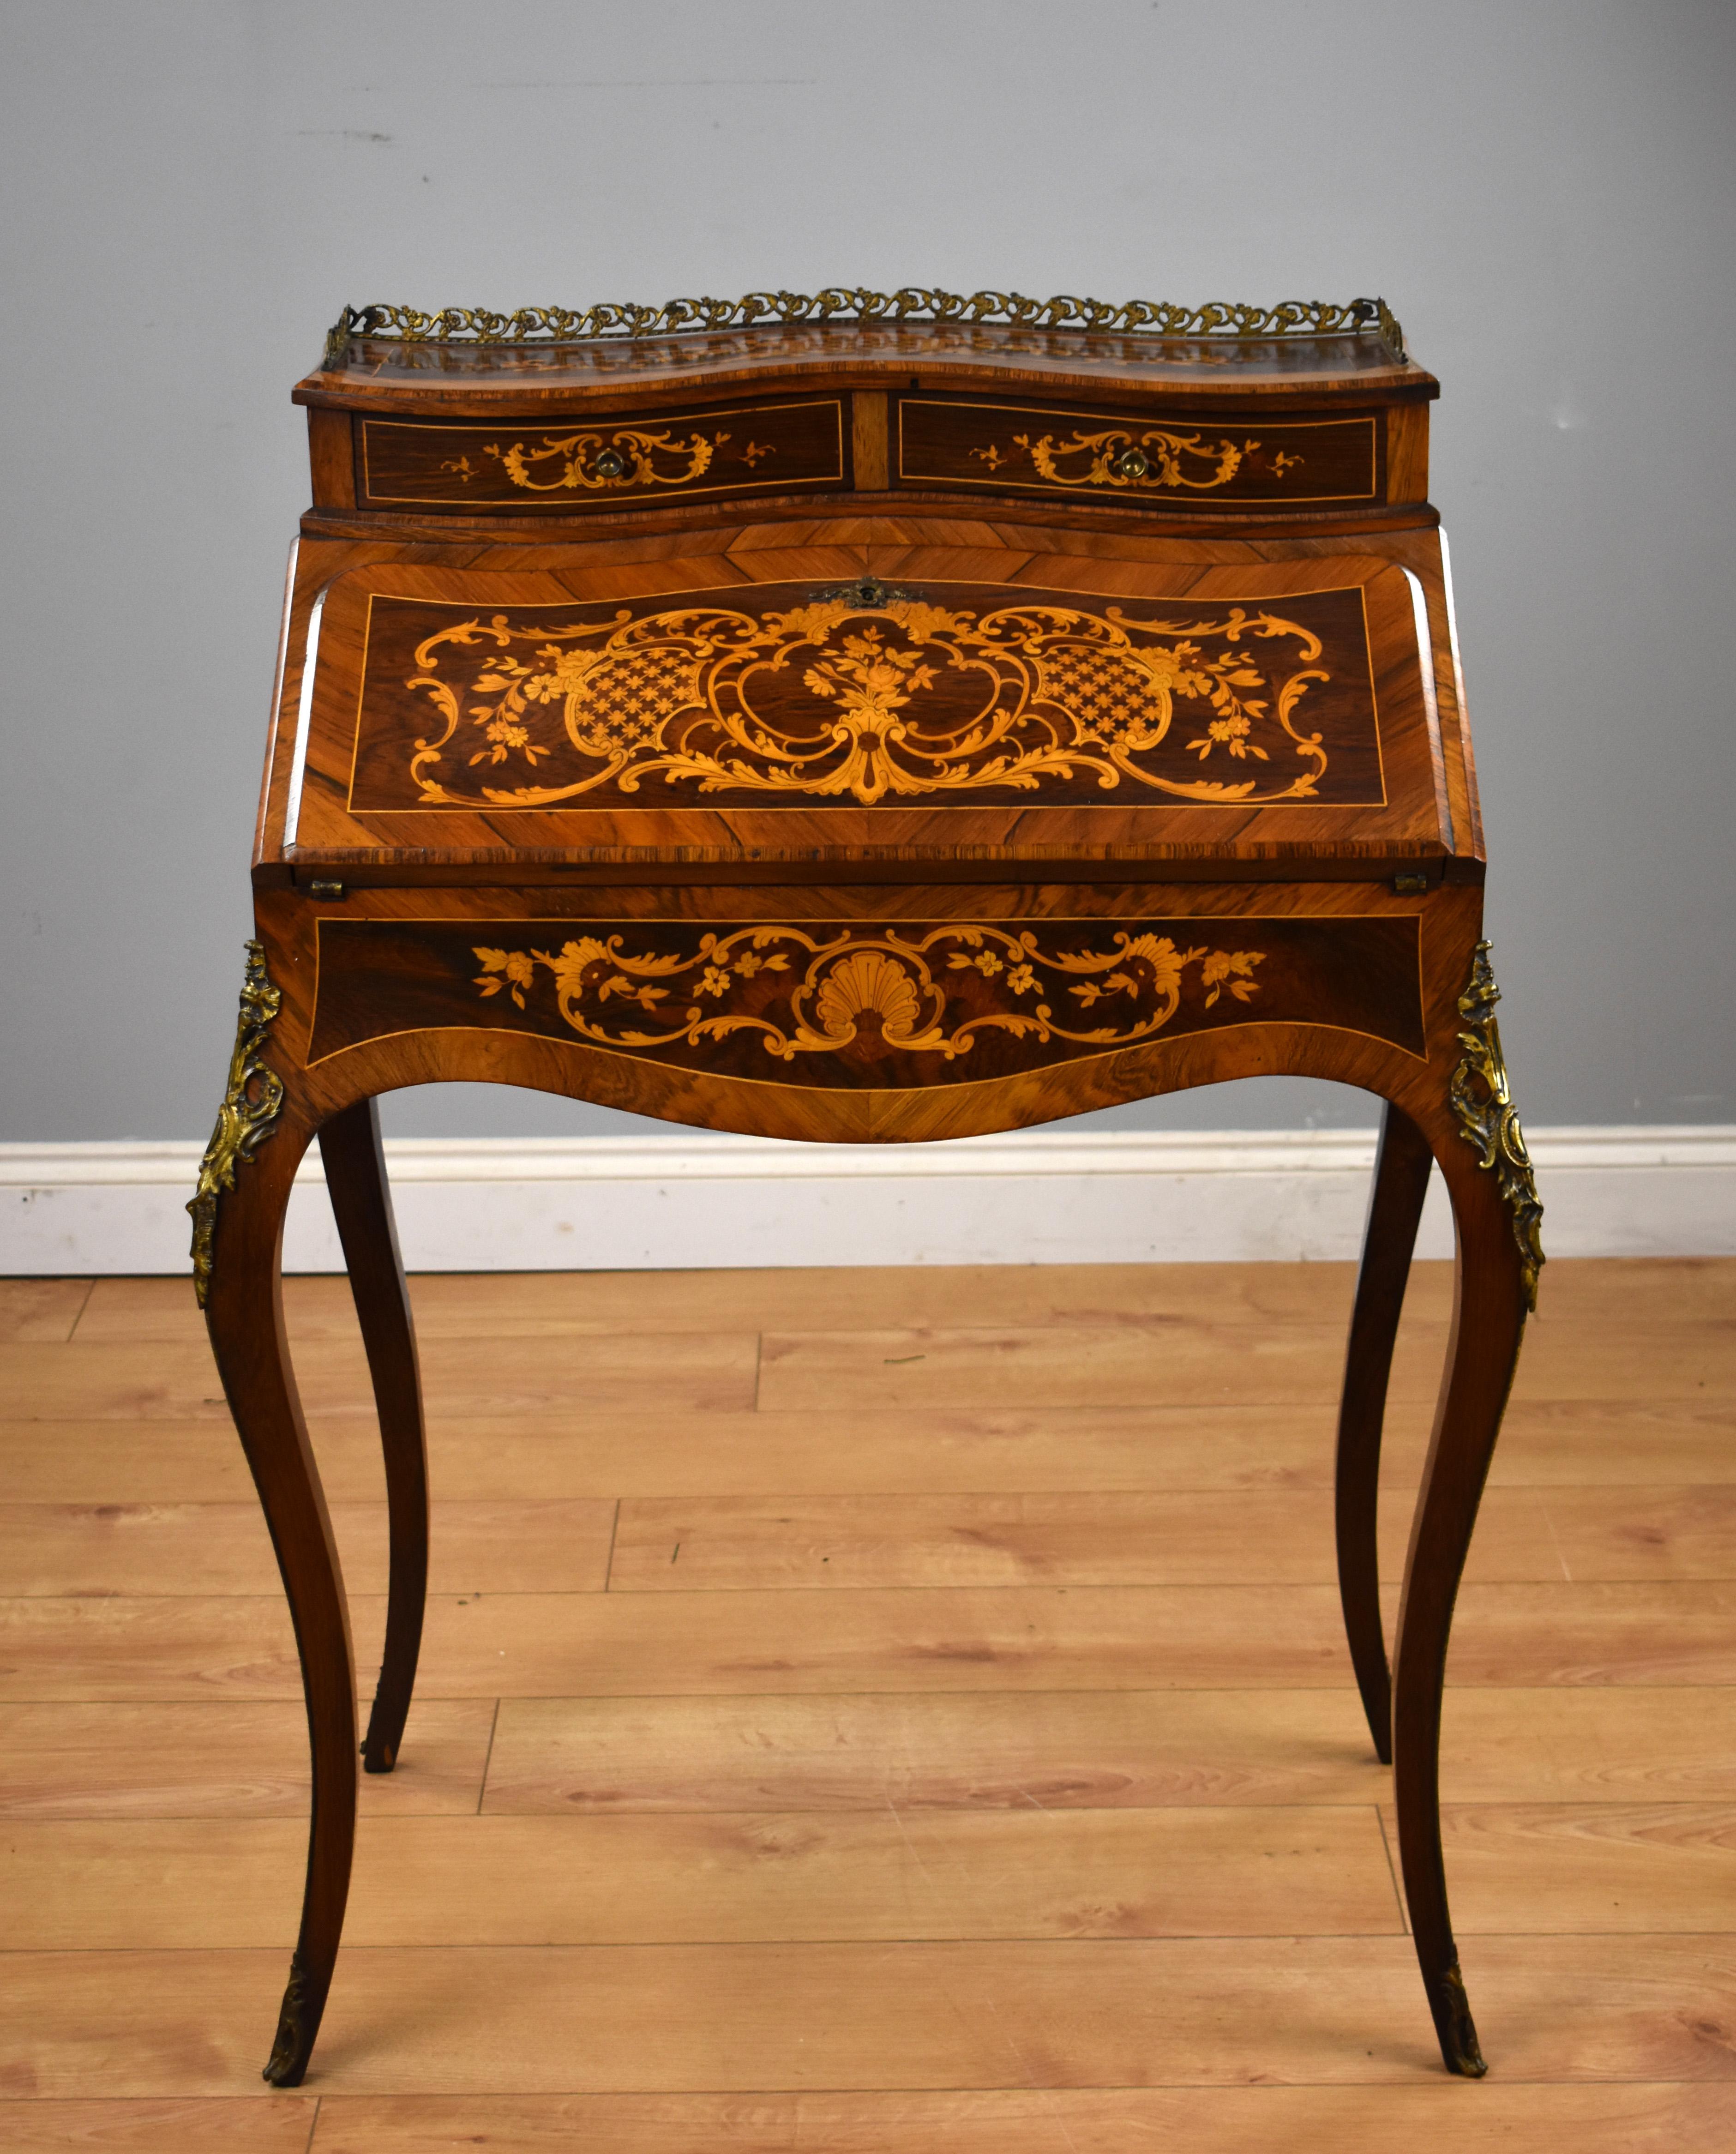 For sale is a good quality 19th century French bureau de dame, having an inlaid shaped top surrounded by an ornate brass gallery, with a fall front below opening to a fitted interior comprising of several drawers and sliding writing surface. The